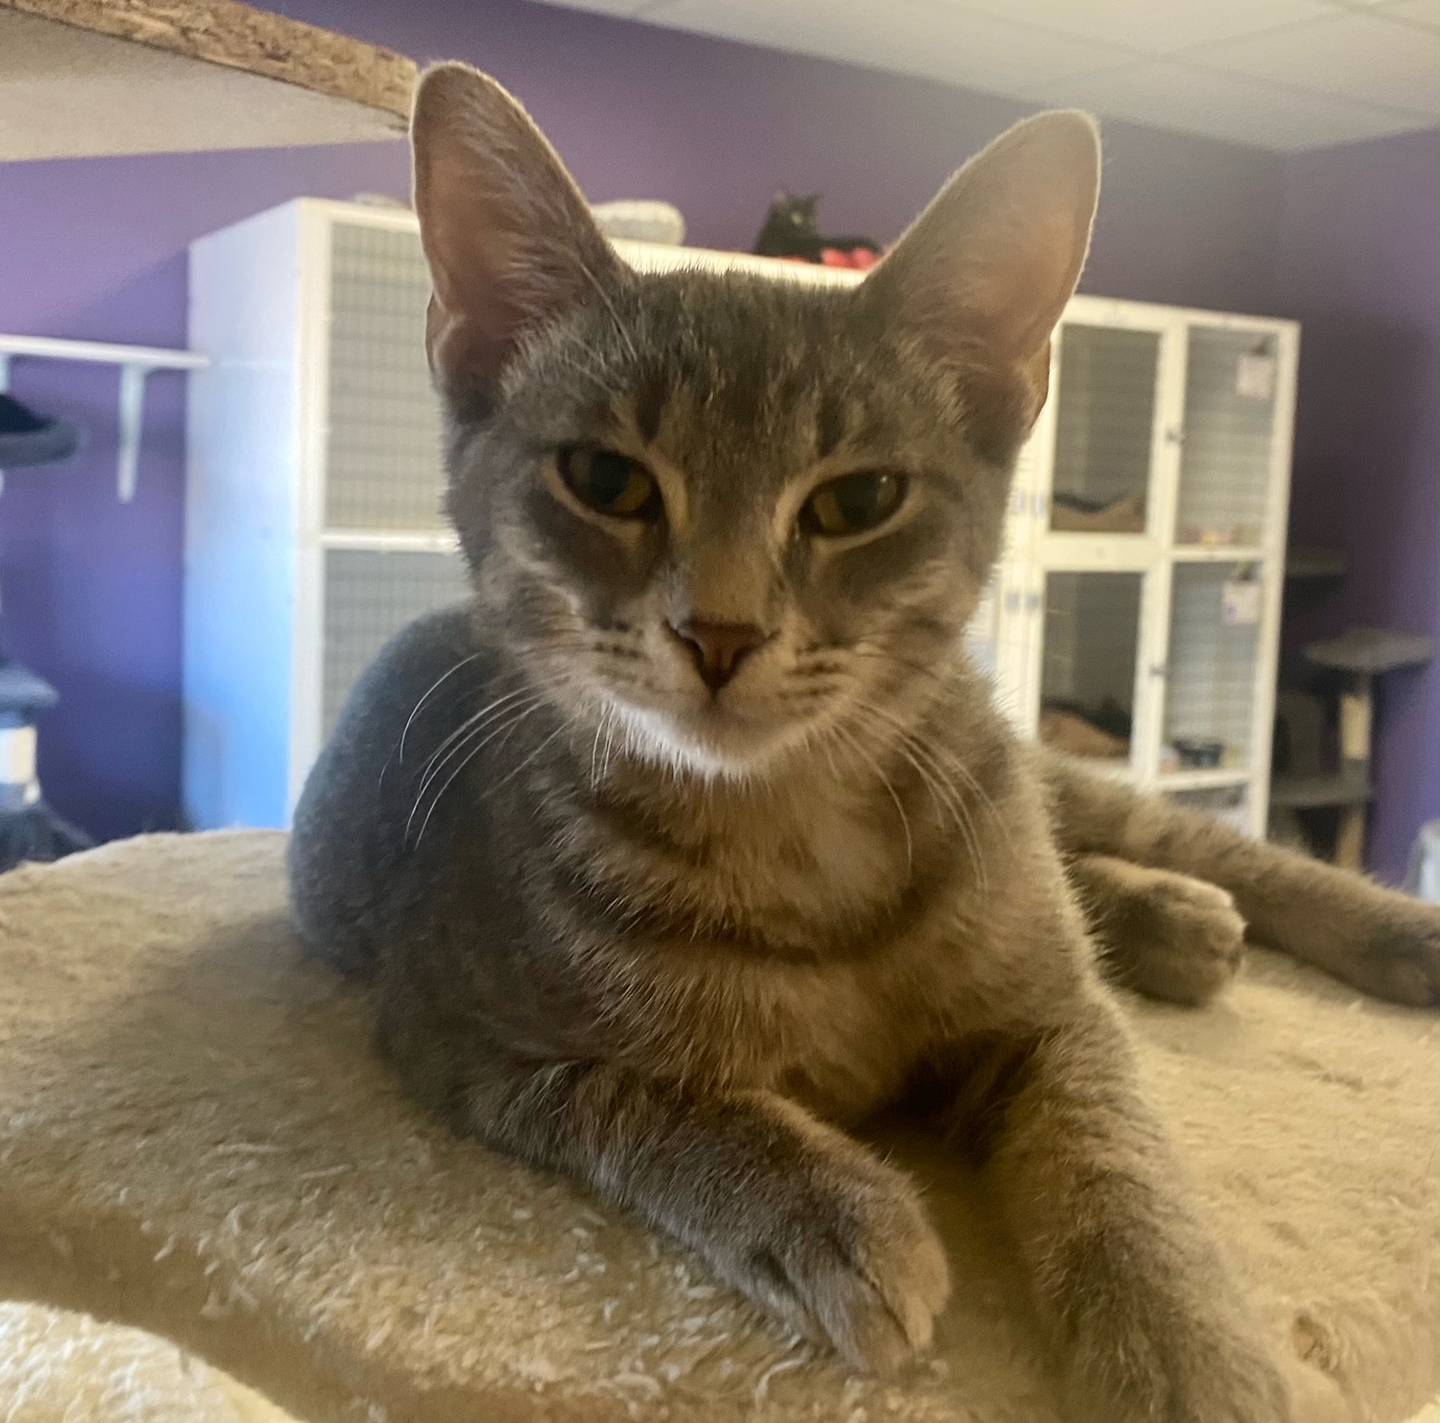 Smurfette is a 6-month-old brown tabby. She is energetic, mischievous, and curious. Smurfette is a bit rambunctious but does indulge in naps. For more information about Smurfette, including adoption fees please visit justanimals.org or call 815-448-2510.